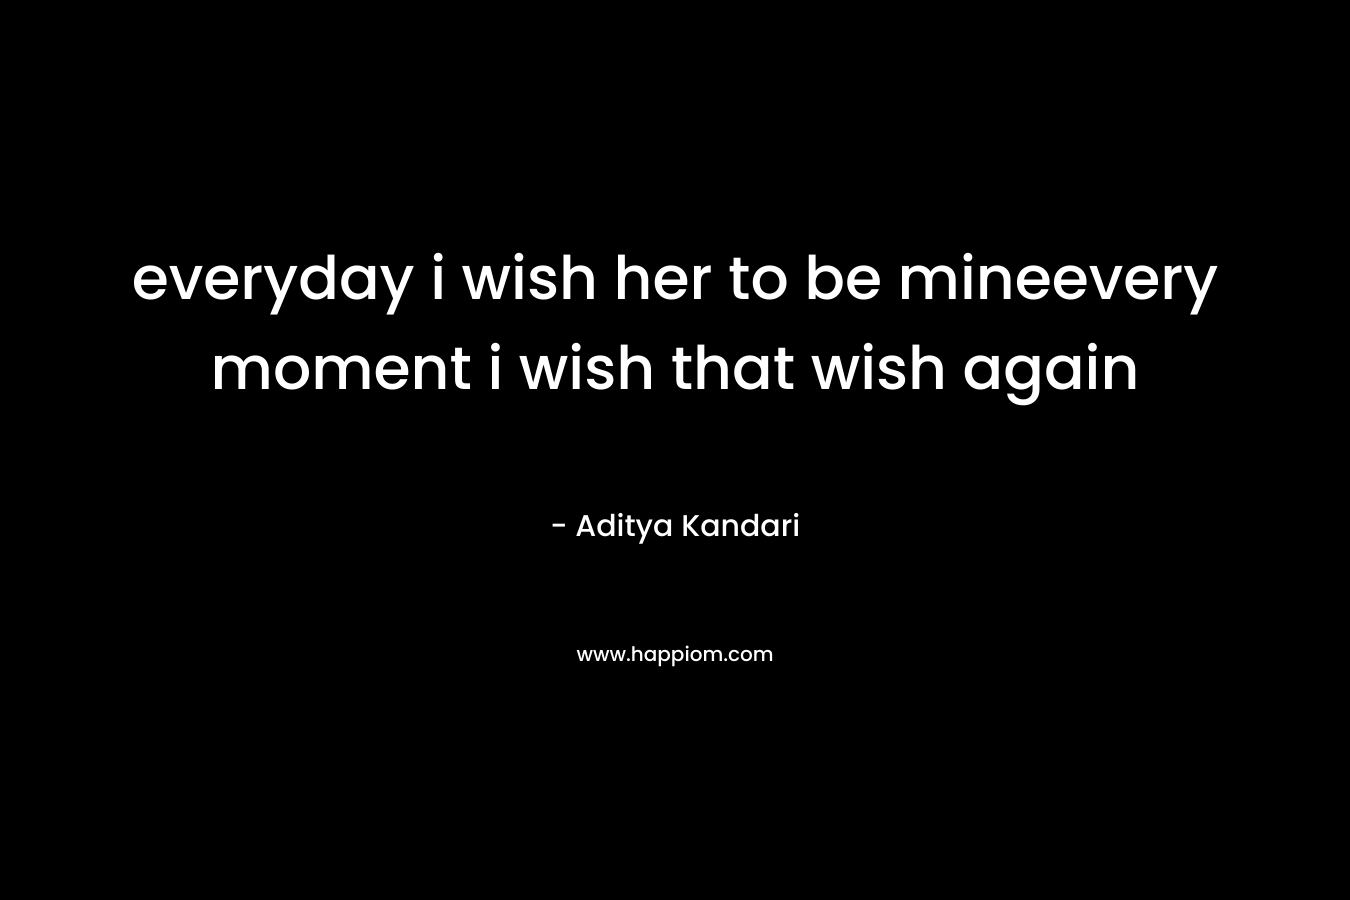 everyday i wish her to be mineevery moment i wish that wish again